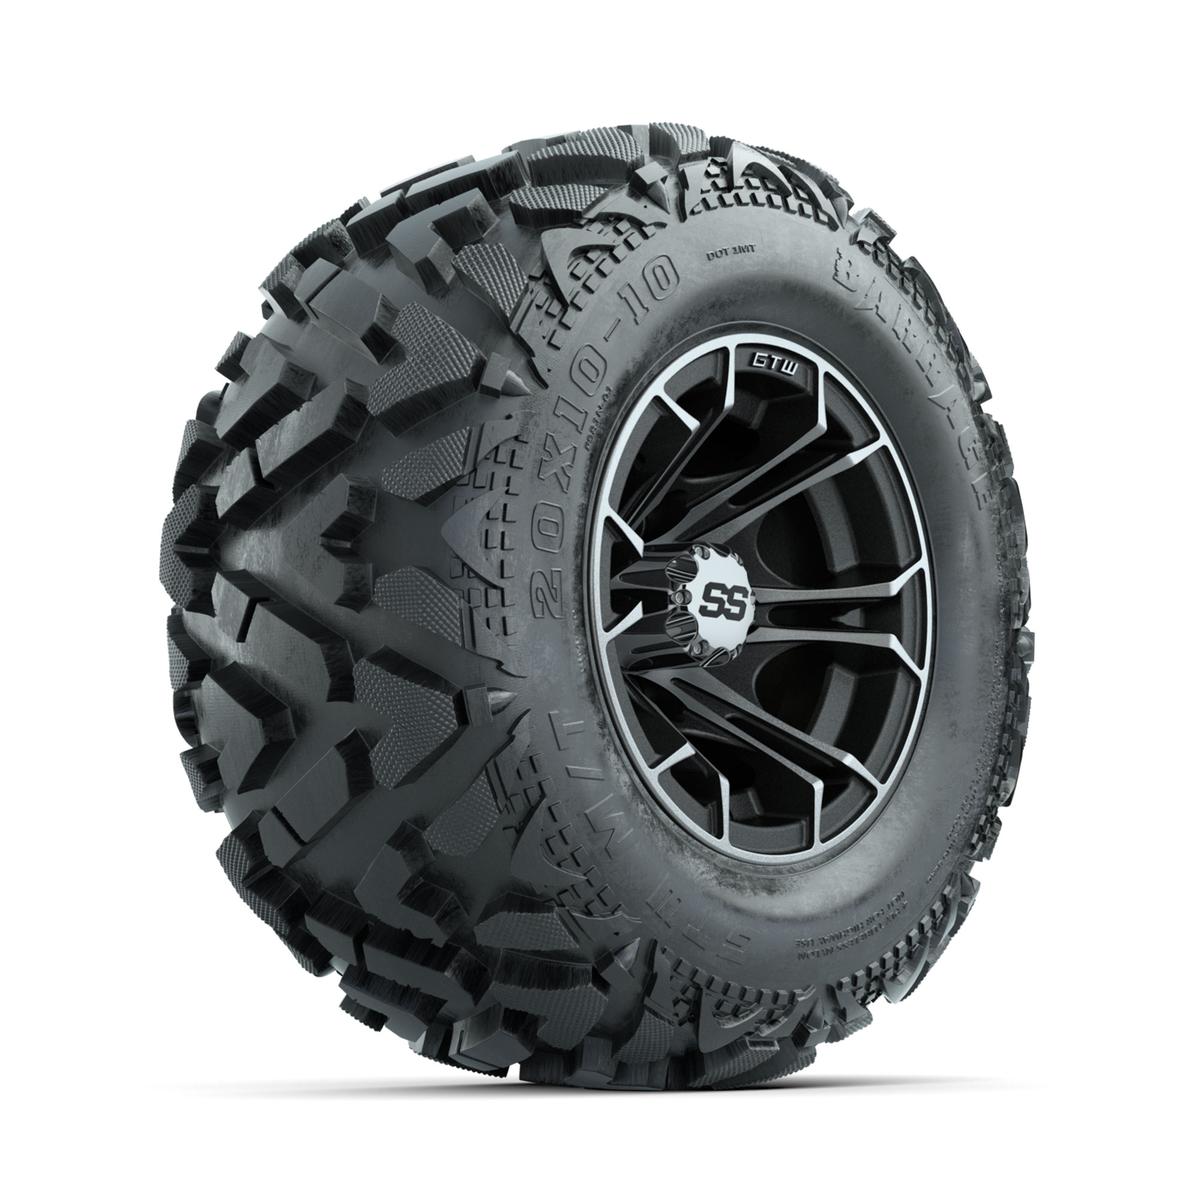 GTW Spyder Machined/Matte Grey 10 in Wheels with 20x10-10 Barrage Mud Tires – Full Set